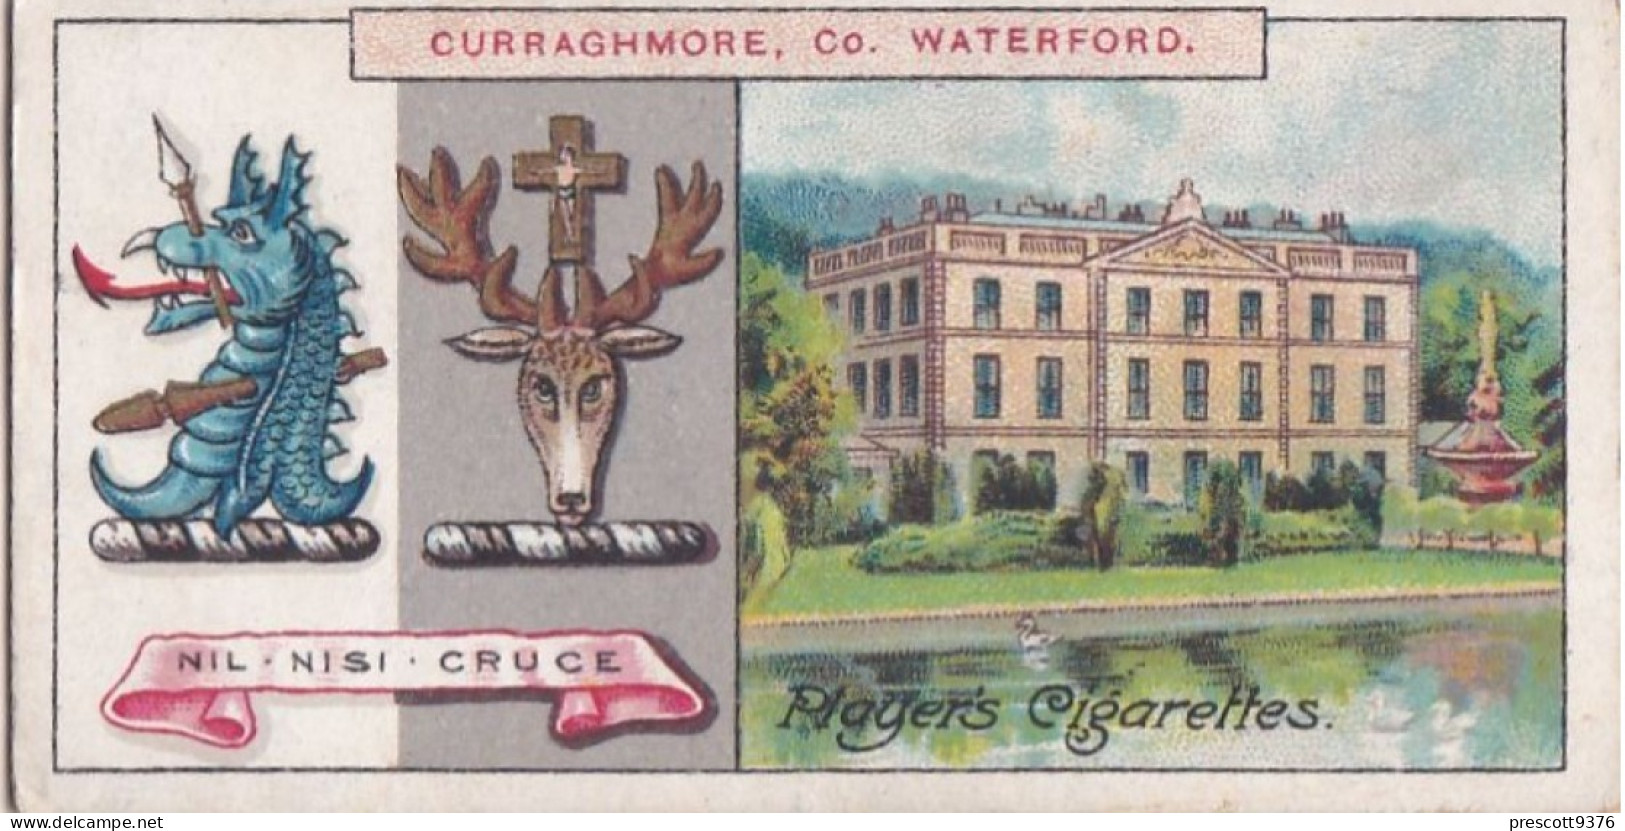 131 Curraghmore Co Waterford - Country Seats & Arms Players Cigarette Card 1909, Original Antique Card. Heraldry - Player's